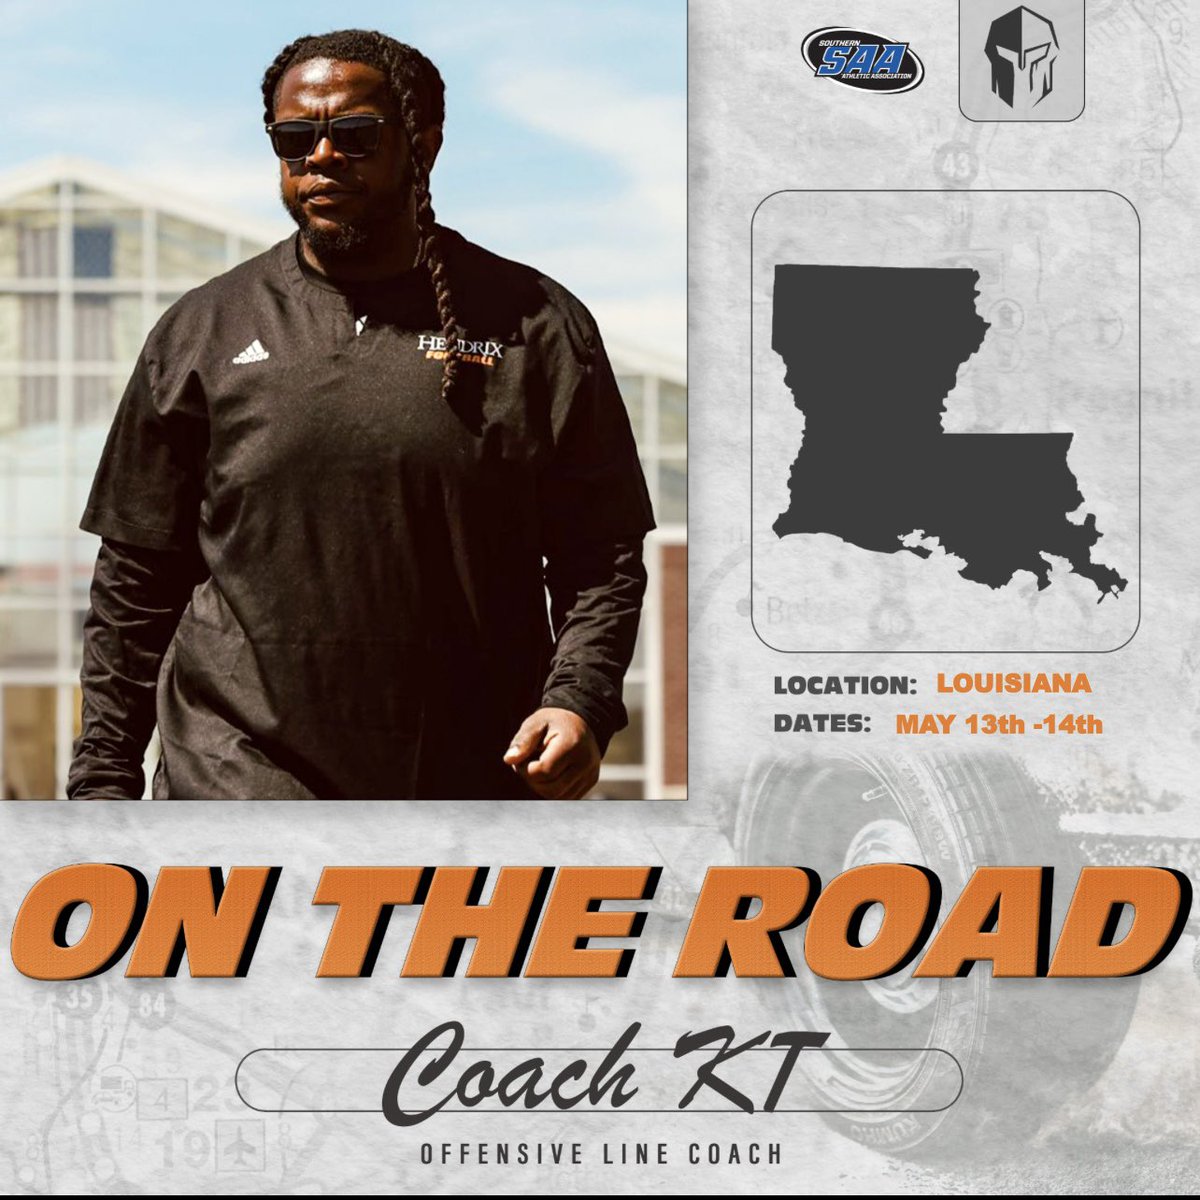 Can’t wait to get to Louisiana this week to find some BALLERS